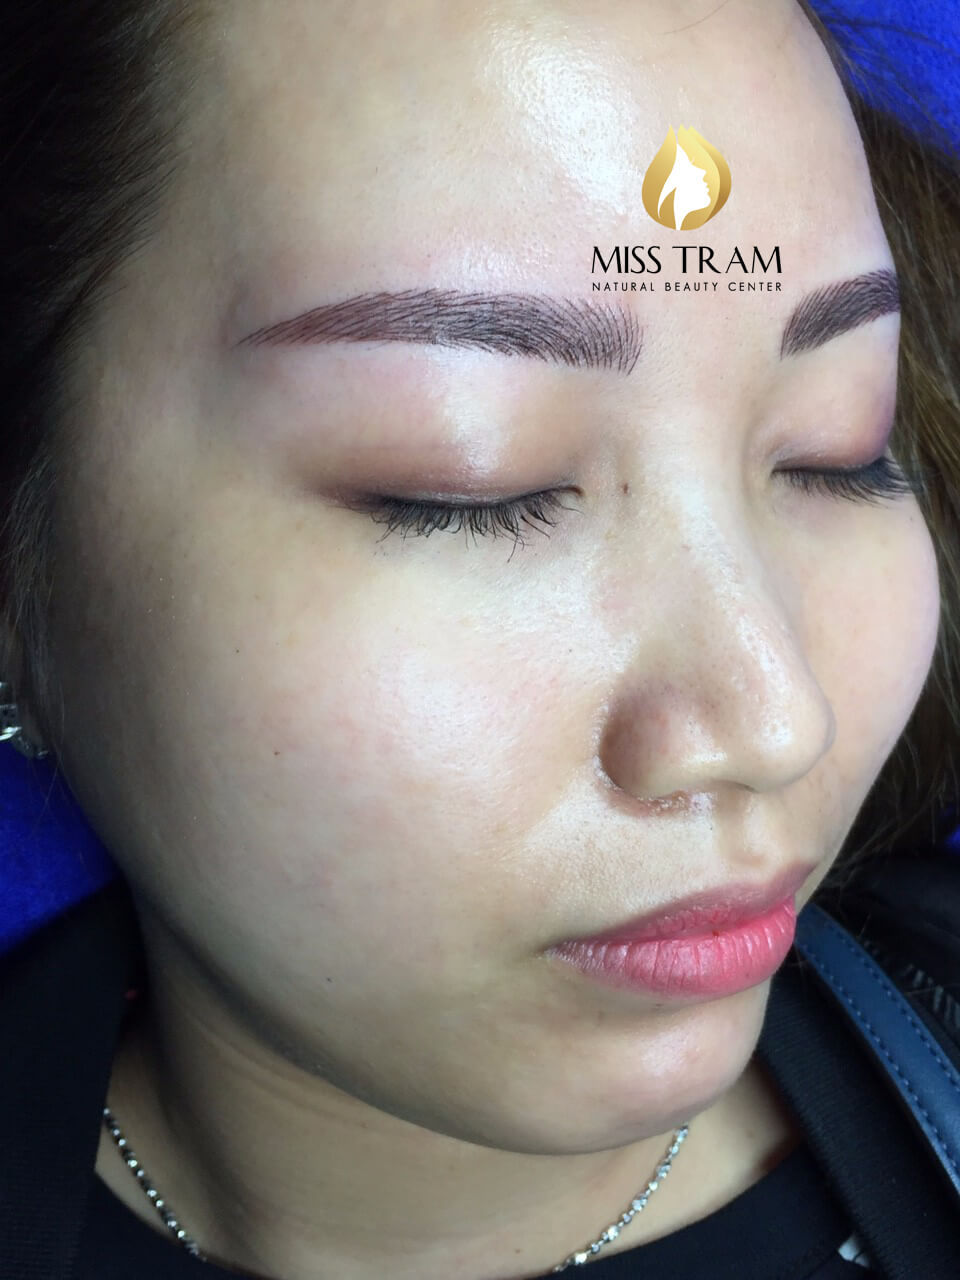 How to Treat the Red and Blue Eyebrow Skin After Tattooing